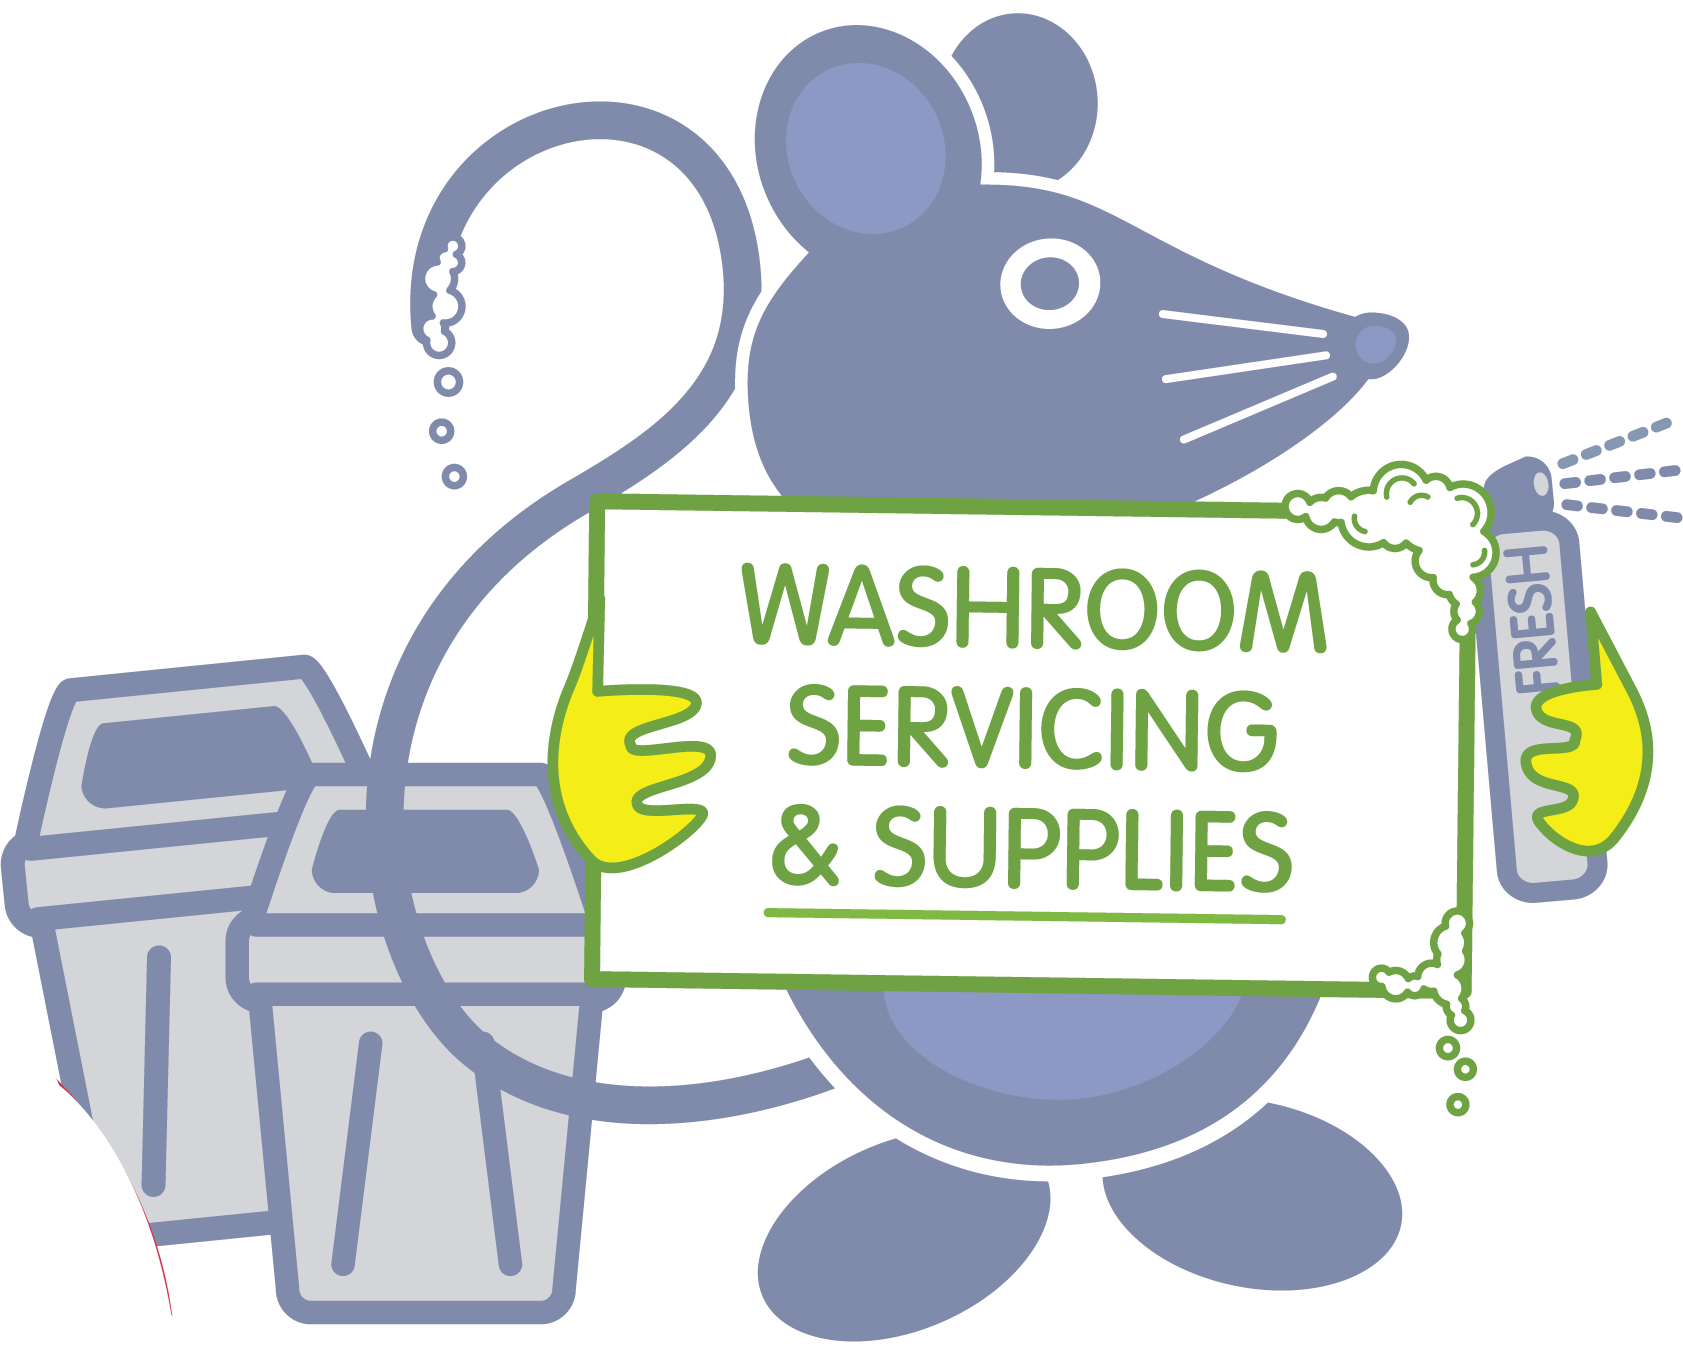 Washroom services and supplies